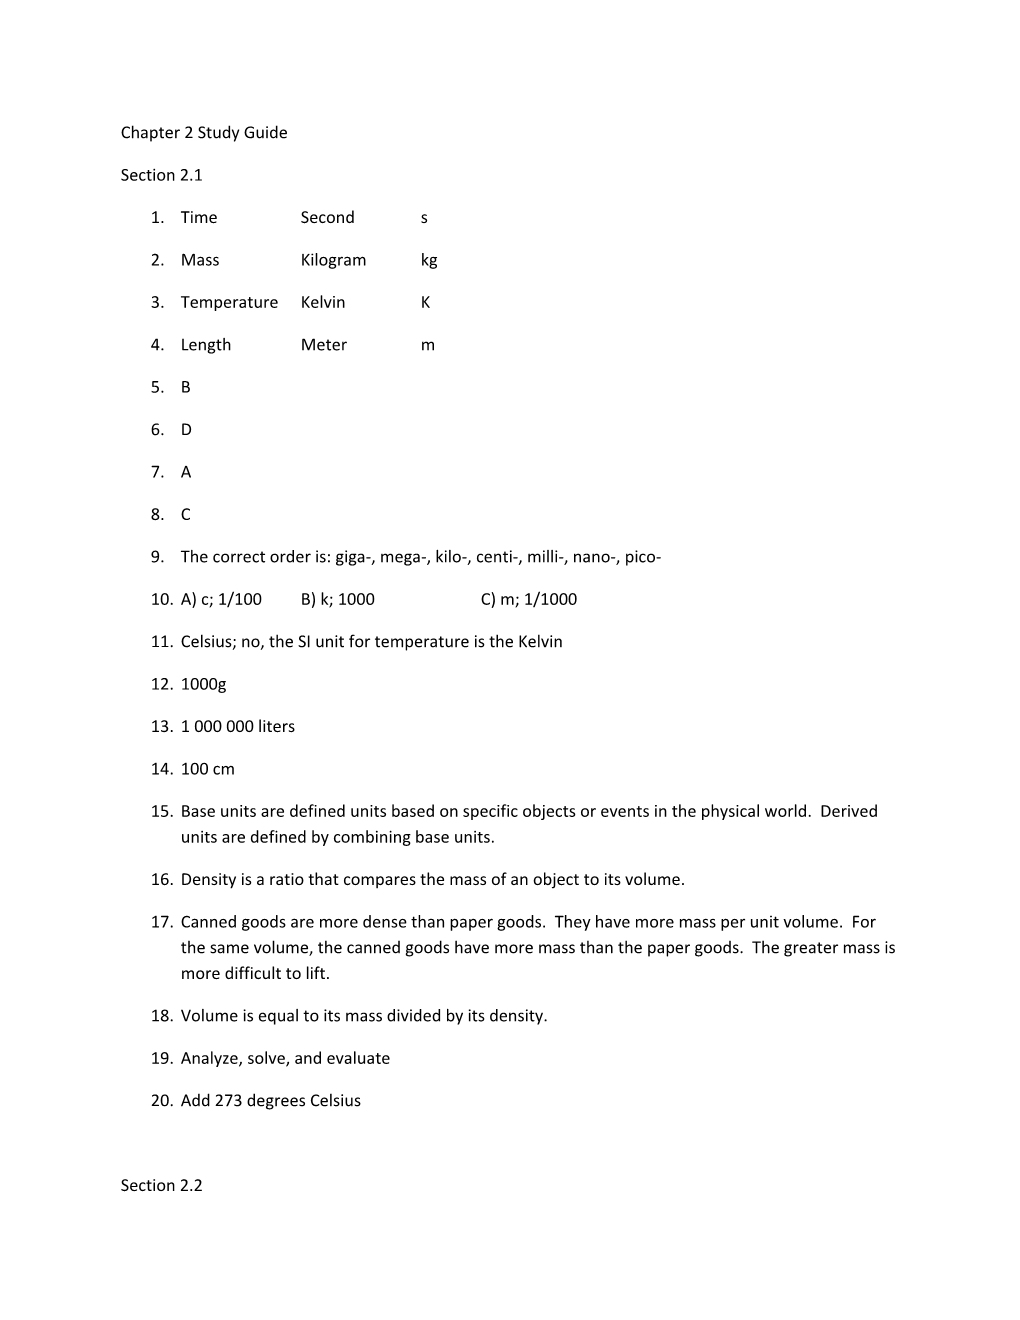 Chapter 2 Study Guide s2